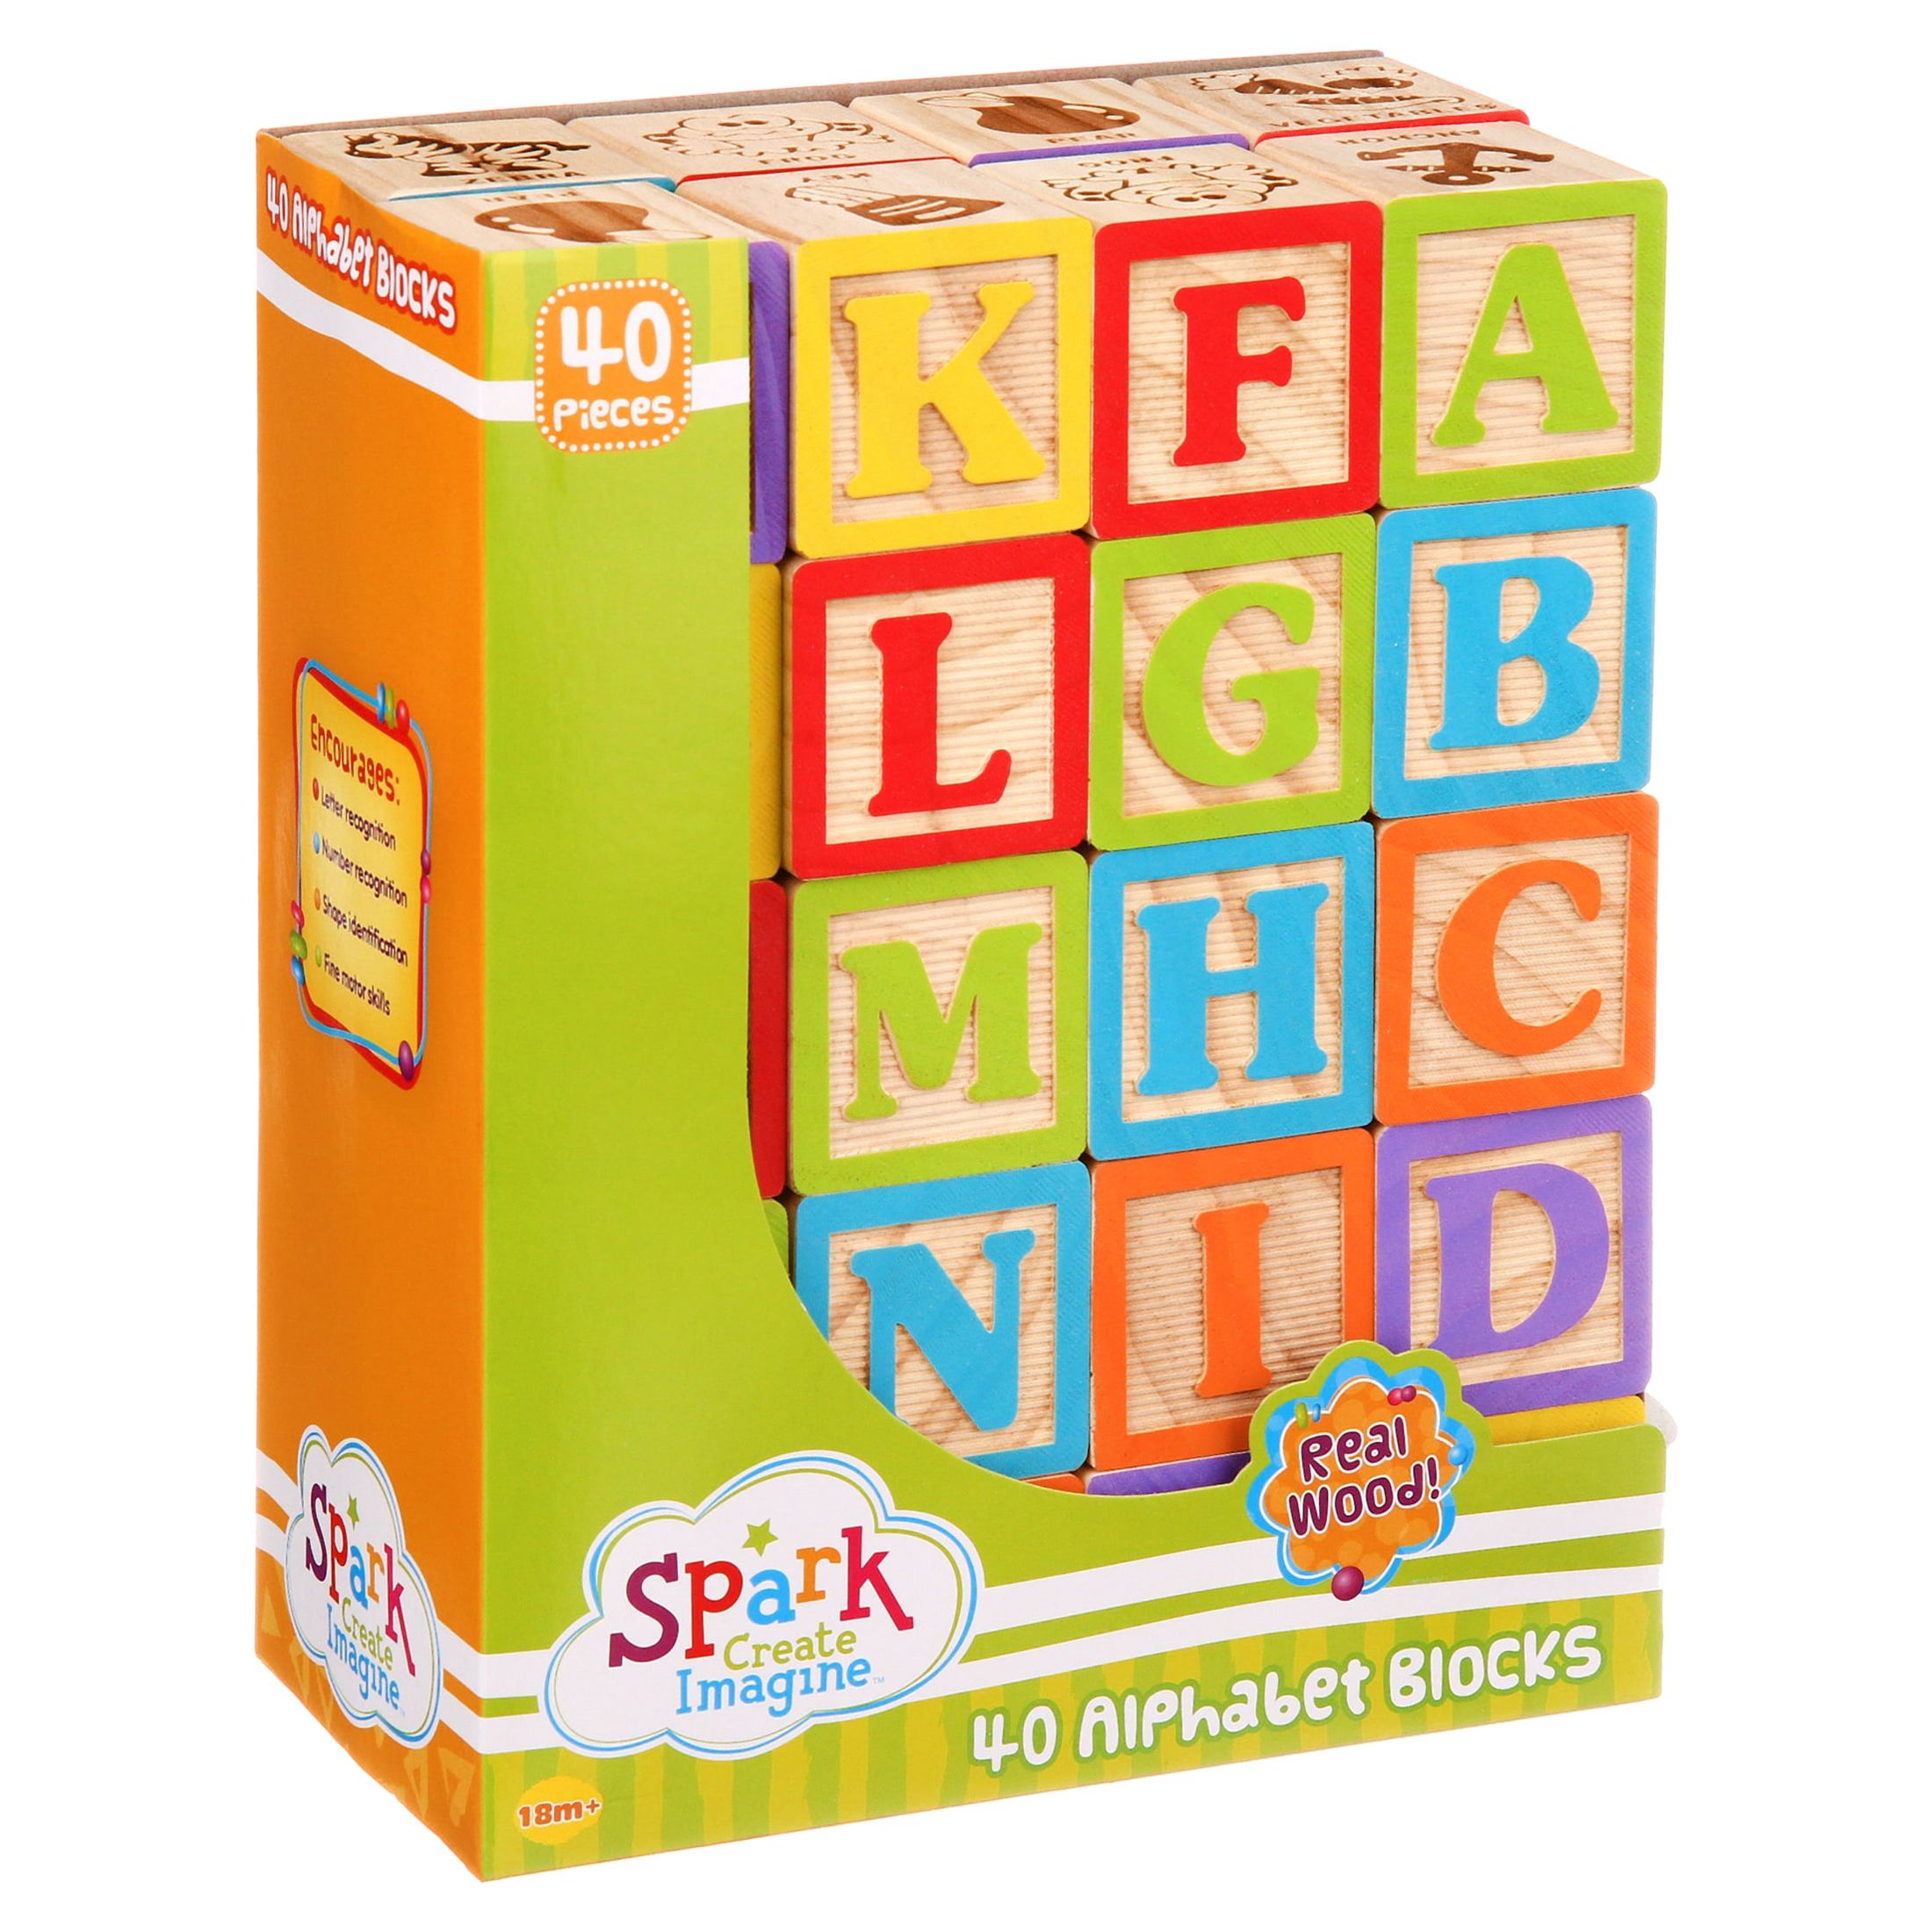 Spark. Create. Imagine 40 Piece ABC Alphabet toy with wooden blocks with bright graphics - image 4 of 9